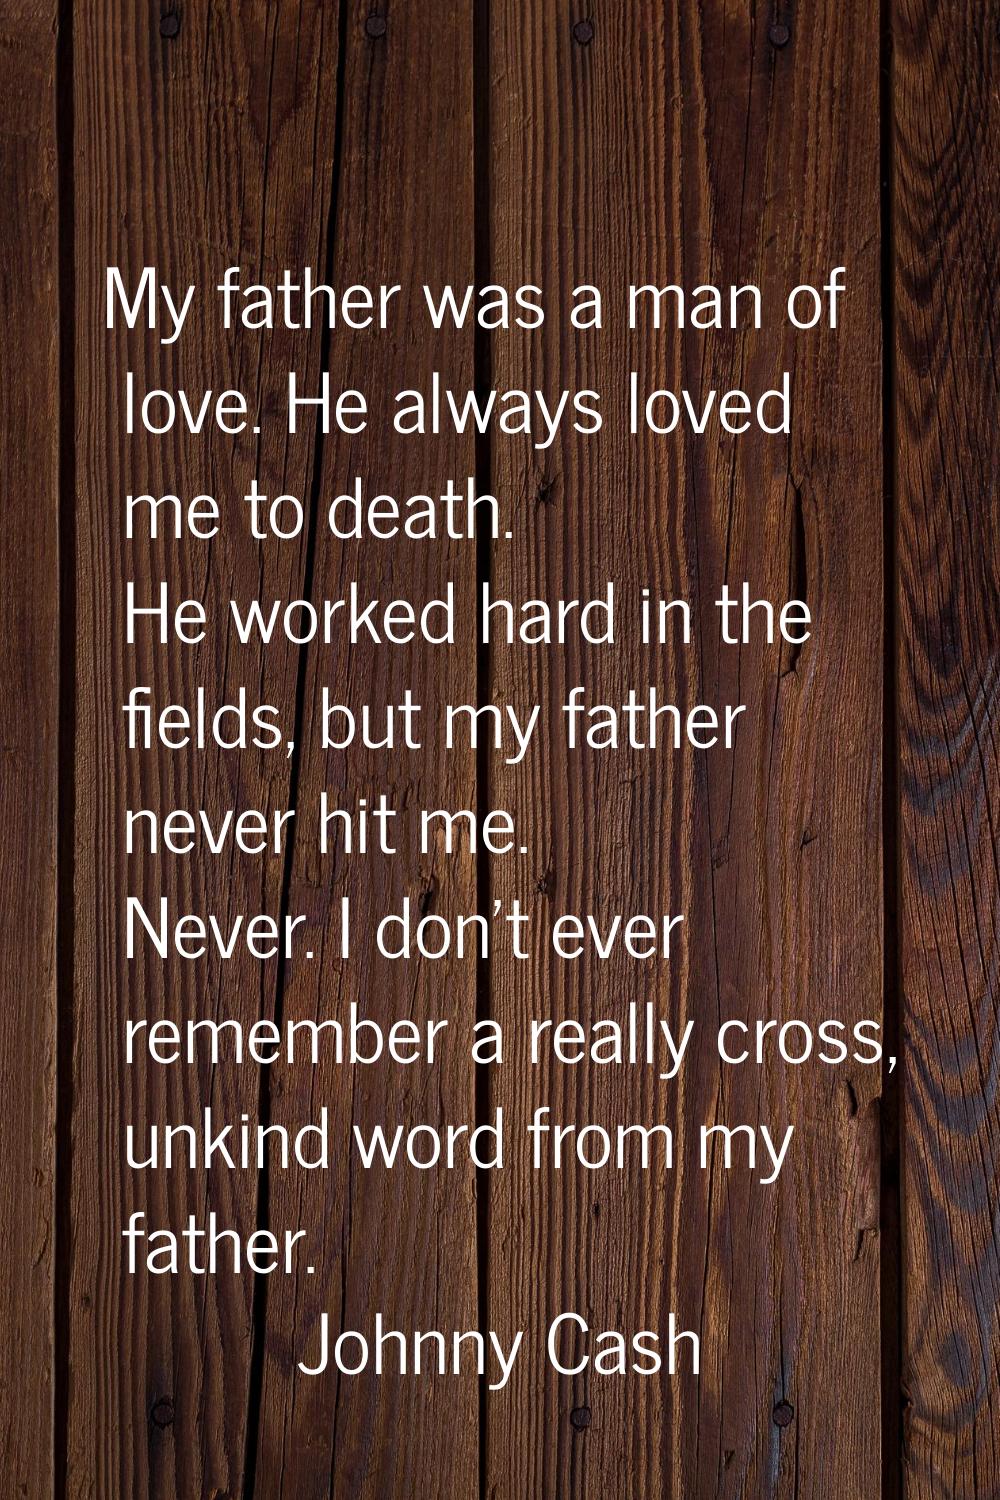 My father was a man of love. He always loved me to death. He worked hard in the fields, but my fath